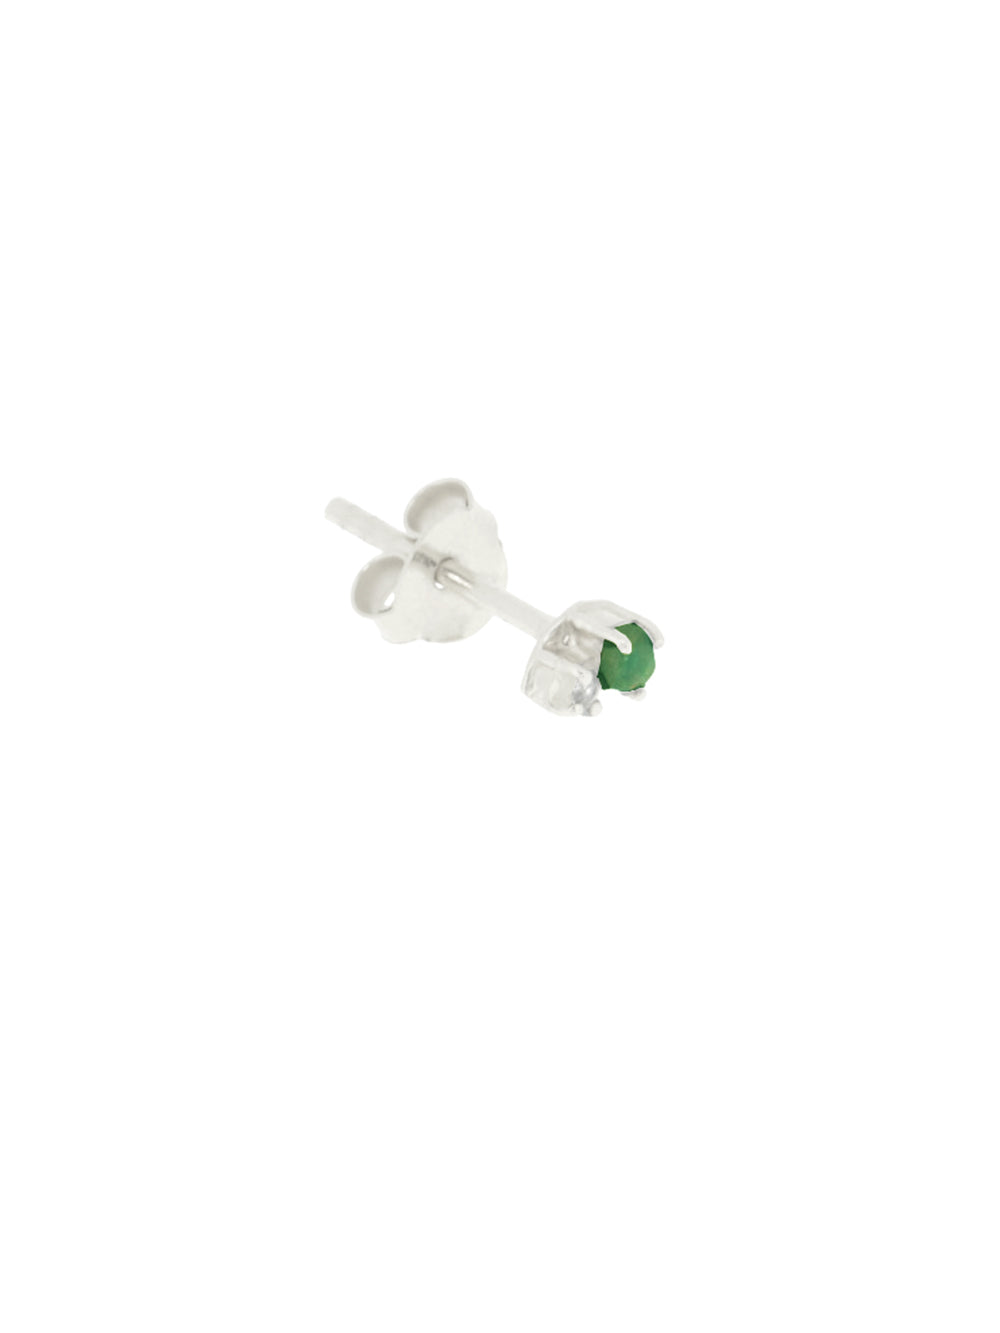 Both of us - Green Onyx | 925 Sterling Silver